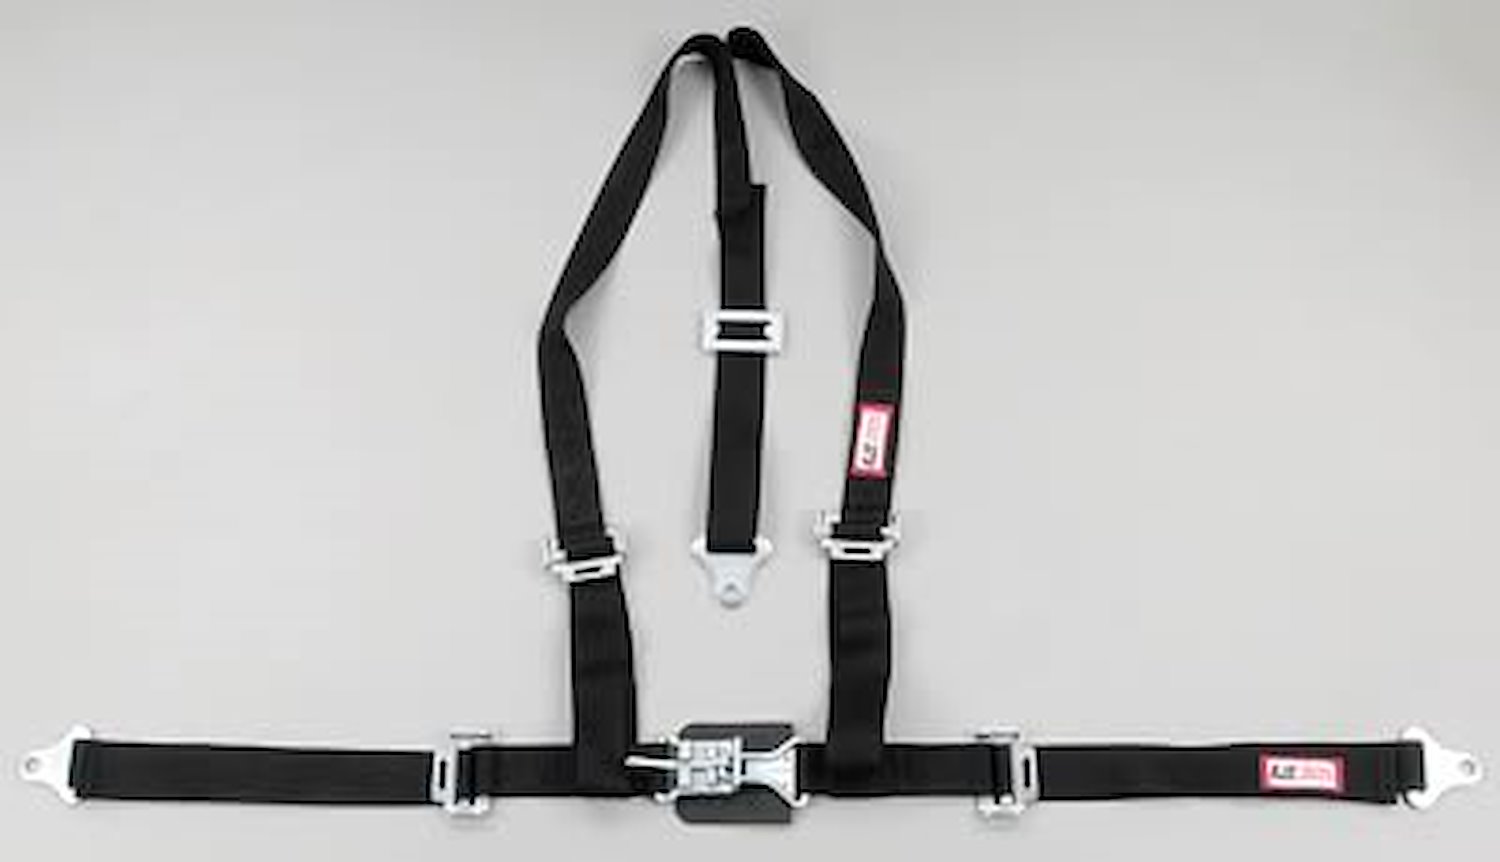 NON-SFI L&L HARNESS 3 PULL UP Lap Belt SEWN IN 2 Shoulder Harness V ROLL BAR Mount w/STERNUM STRAP ALL SNAP ENDS RED